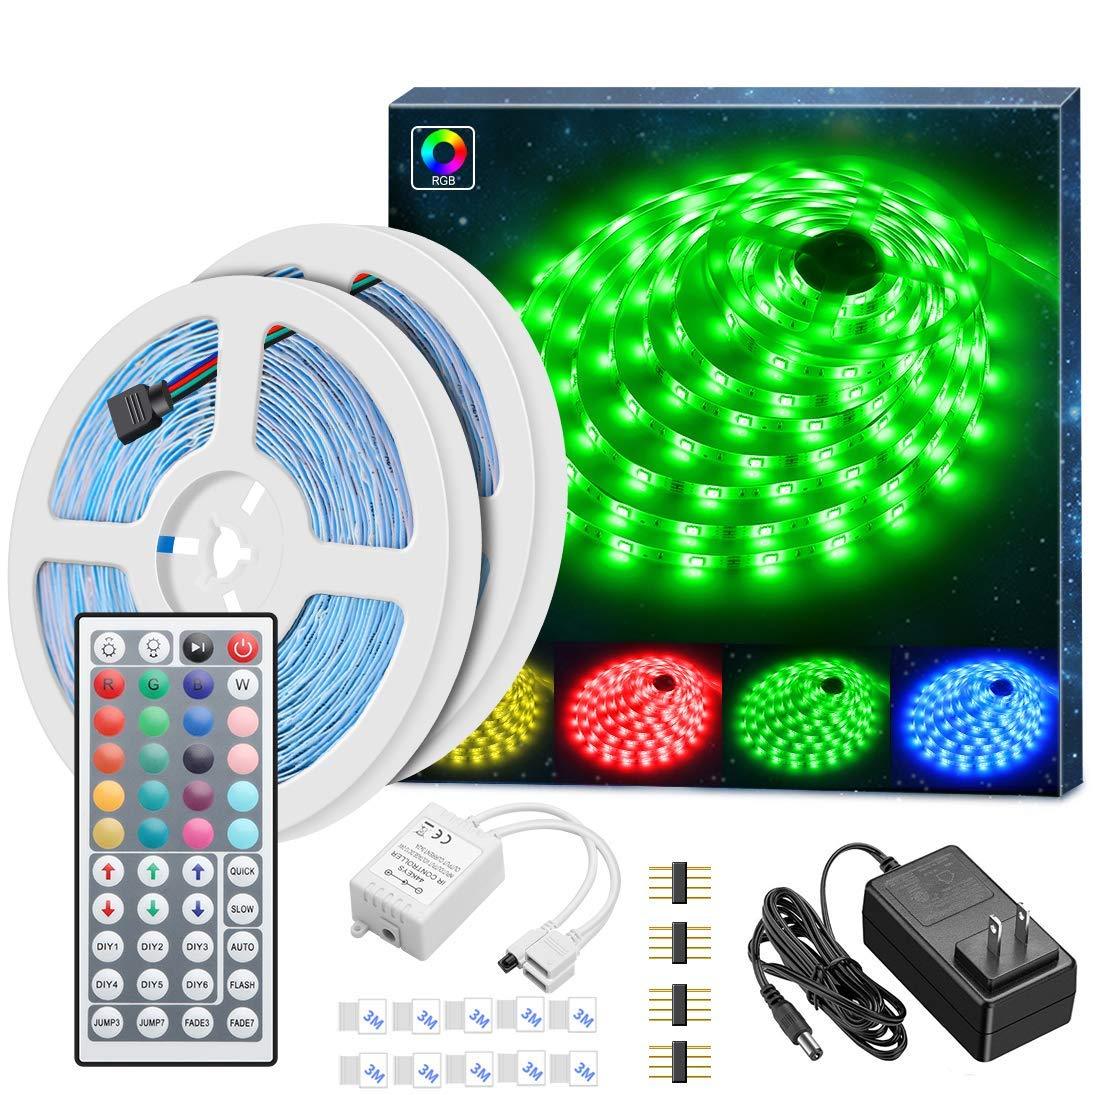 Led Strip MINGER 32.8Ft RGB Light Strip with Remote, Controller Box and Support Clips Ideal for Room, Bedroom, Home, Kitchen Cabinet, Party Decoration 12V/3A Power Supply, - Walmart.com